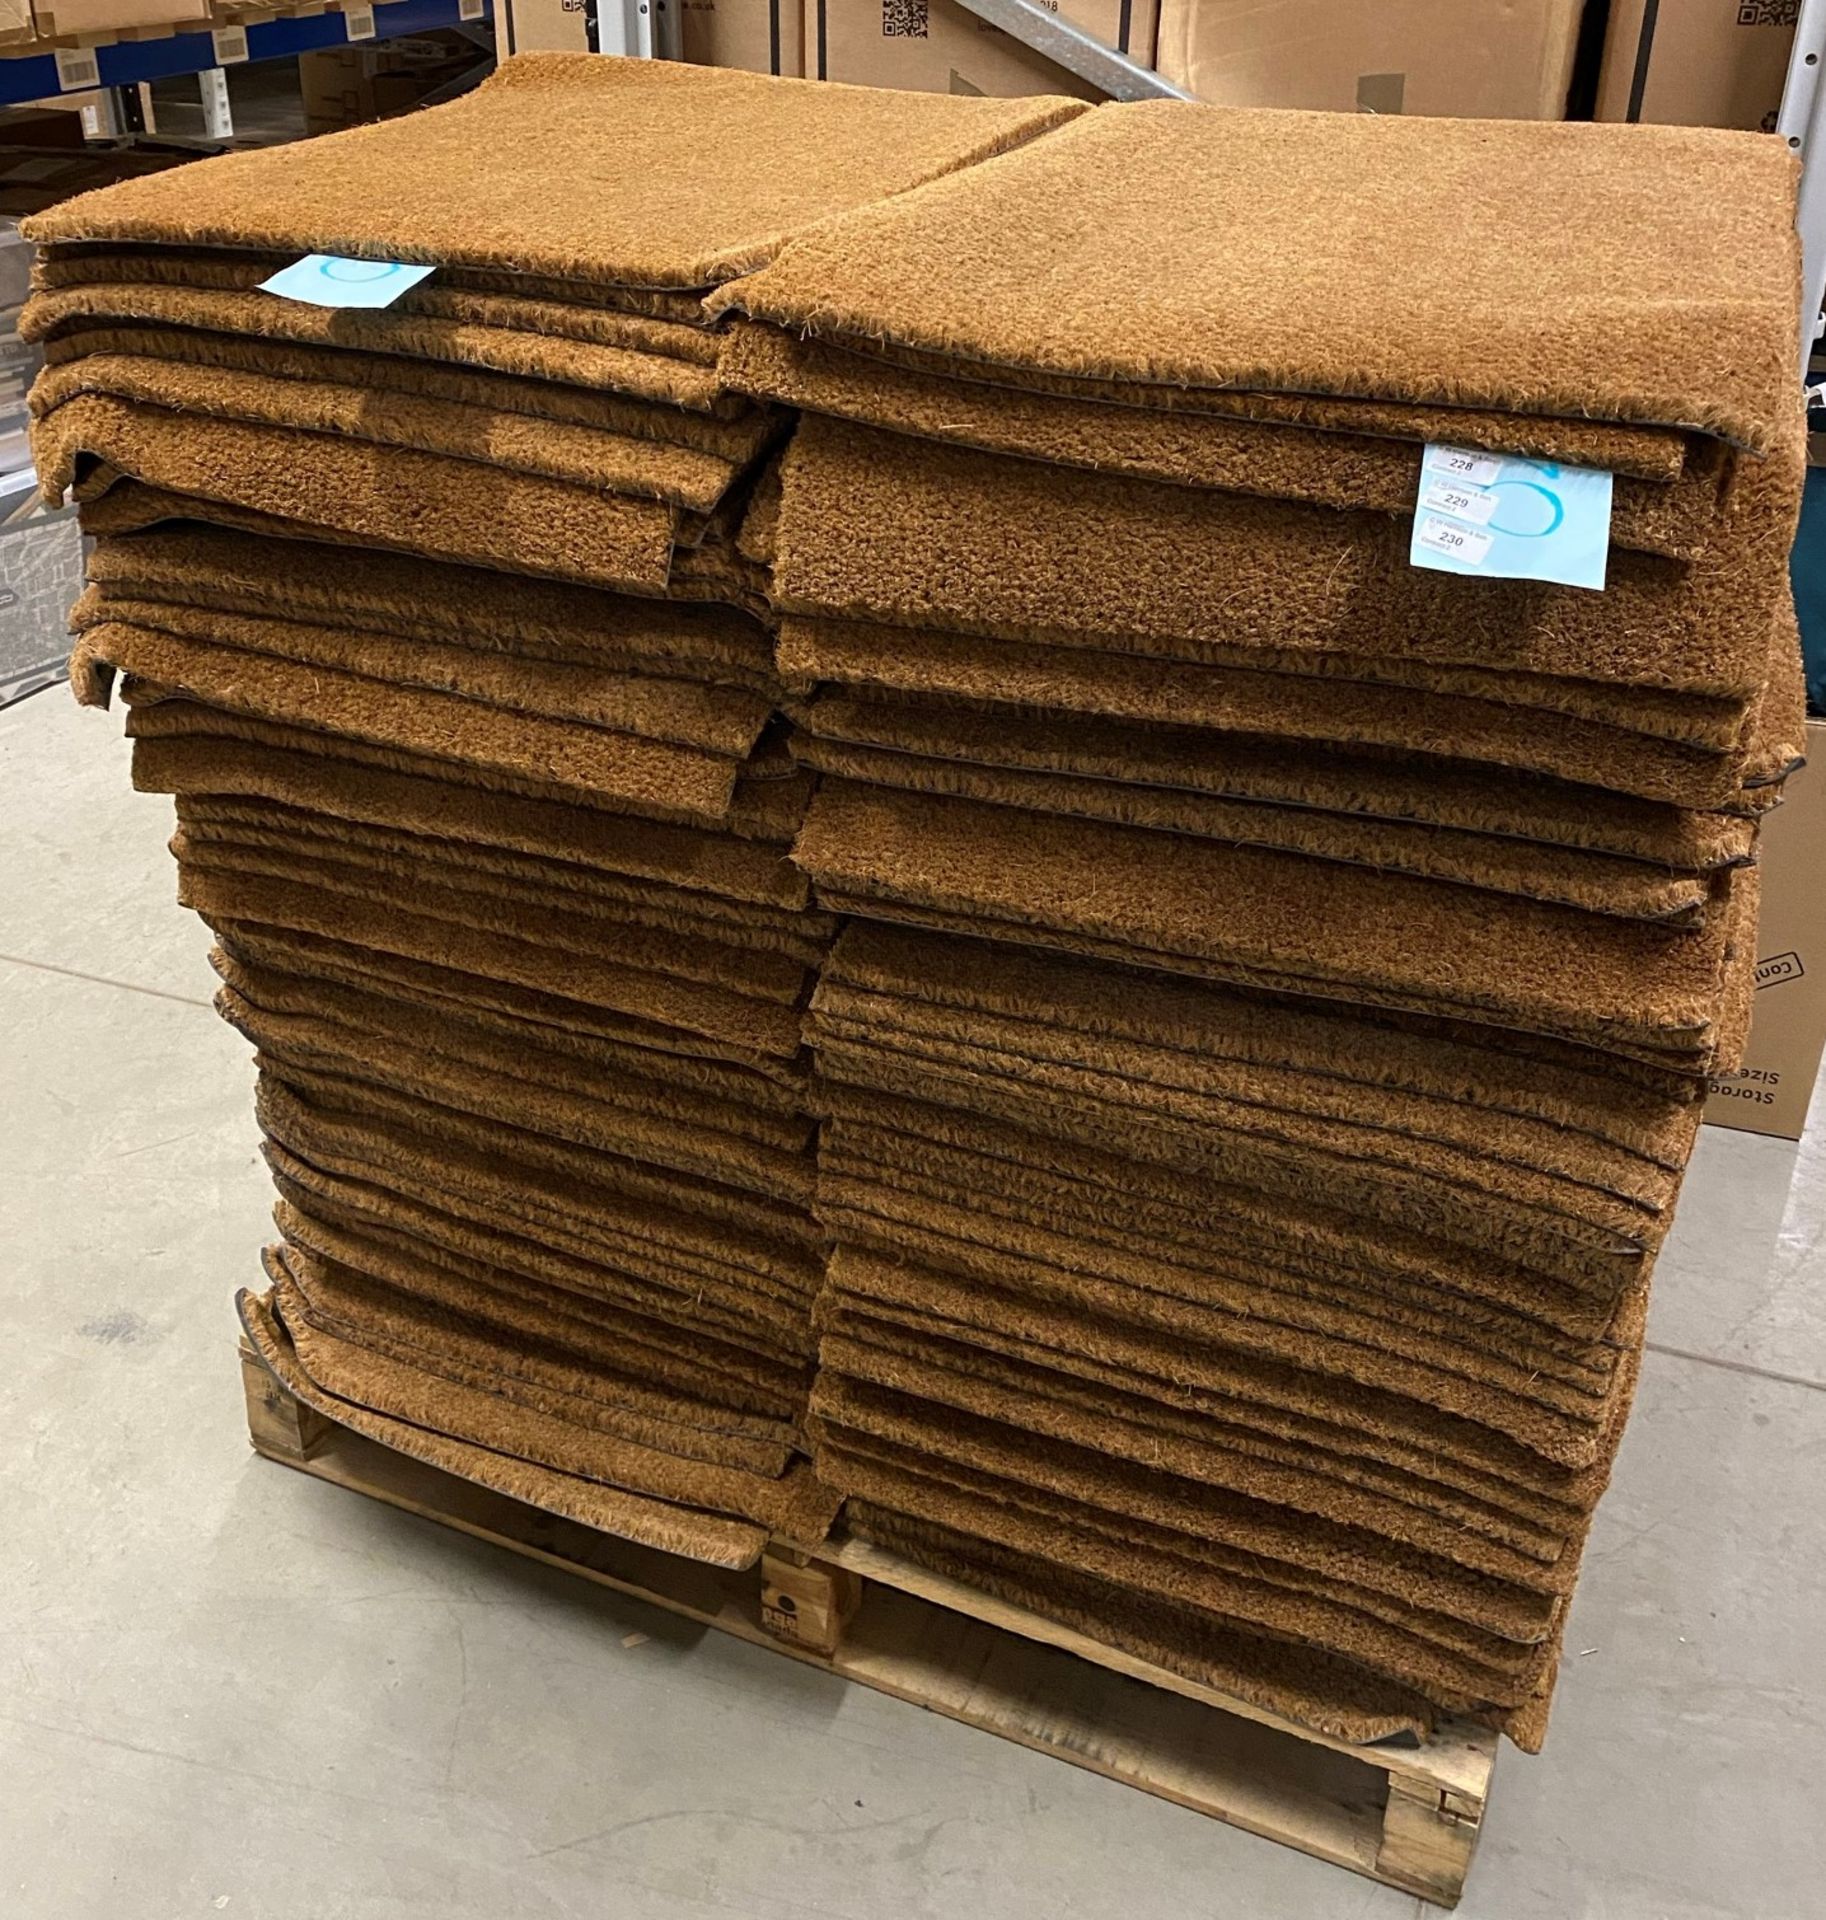 10 x Extra large rubber backed Coir door mats (90cm x 60cm) - Image 6 of 6